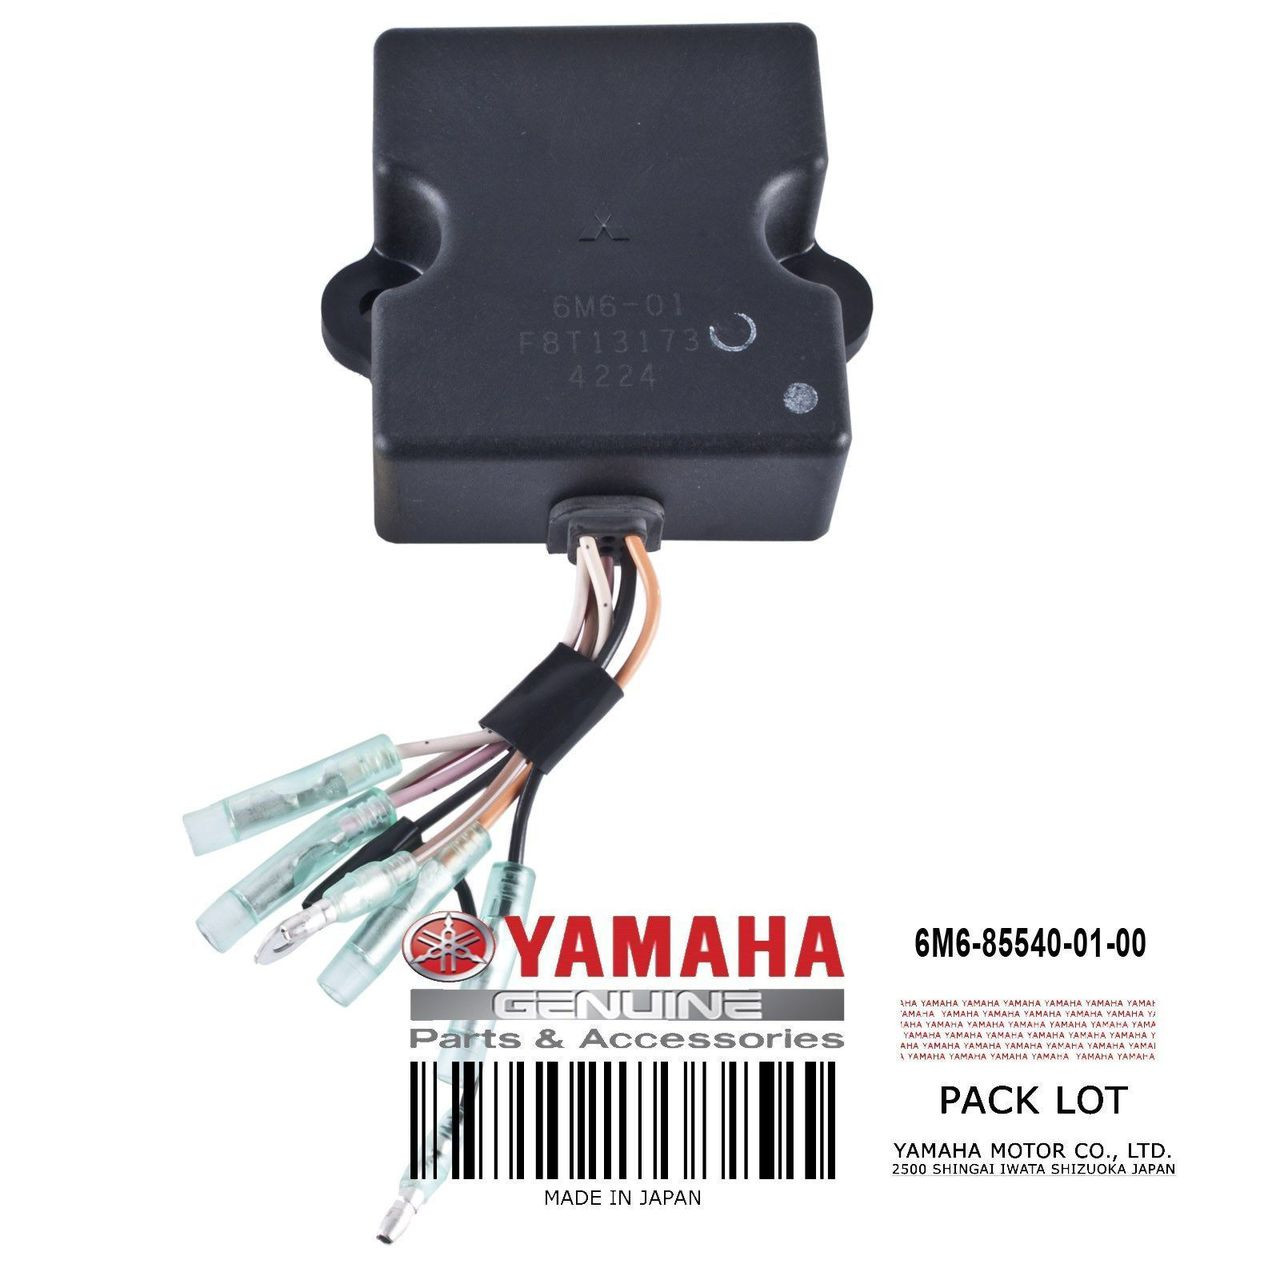 CDI (Capacitor Discharge Ignition) UNIT ASSEMBLY OEM Part 6M6-85540-01-00  Applications 1990 Yamaha PWC SUPER JET 650 1990 Yamaha PWC WAVE RUNNER III  650 1991 Yamaha PWC SUPER JET 650 1991 Yamaha PWC VXR 650 (806931) 1991  Yamaha PWC VXR 650 1991 Ya